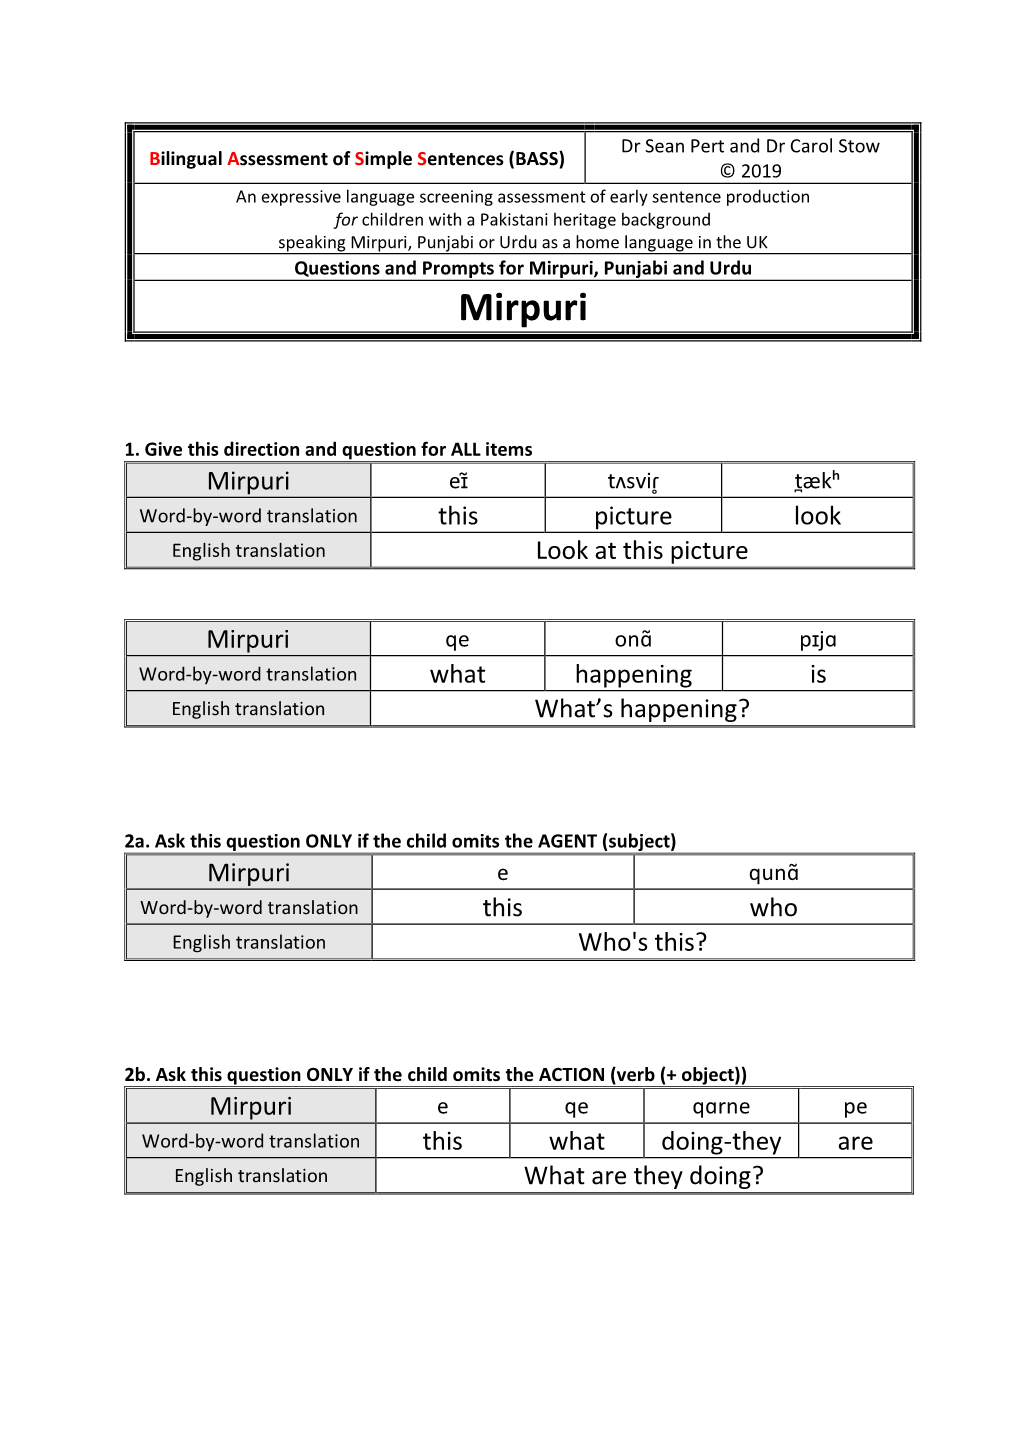 BASS Questions and Prompts for Mirpuri, Punjabi and Urdu